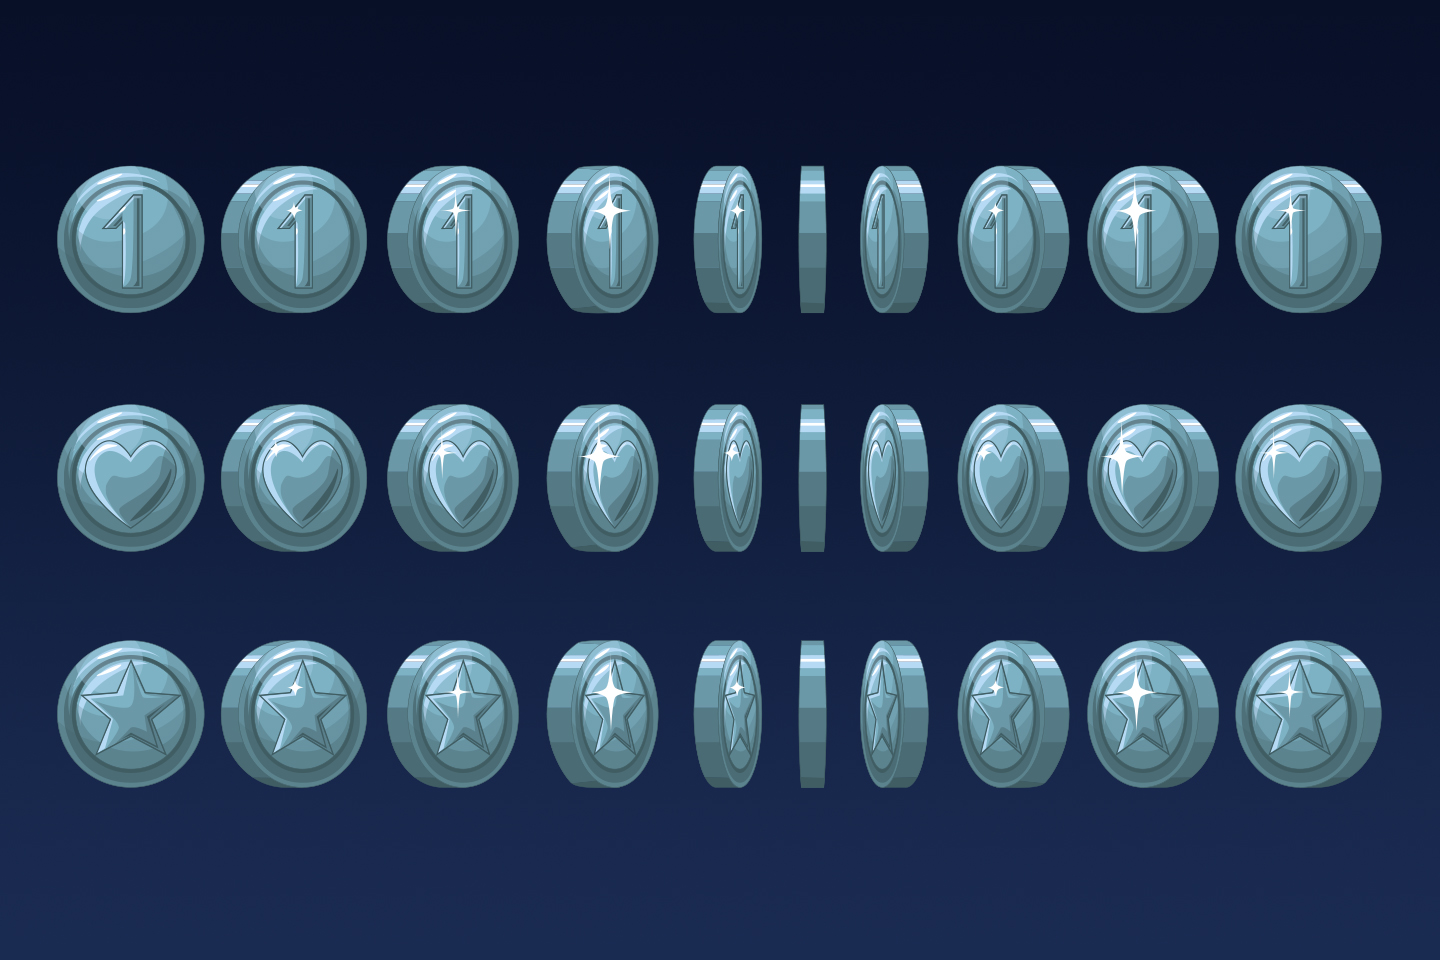 Here you can download free set of Game Coins Sprite Sheets. 